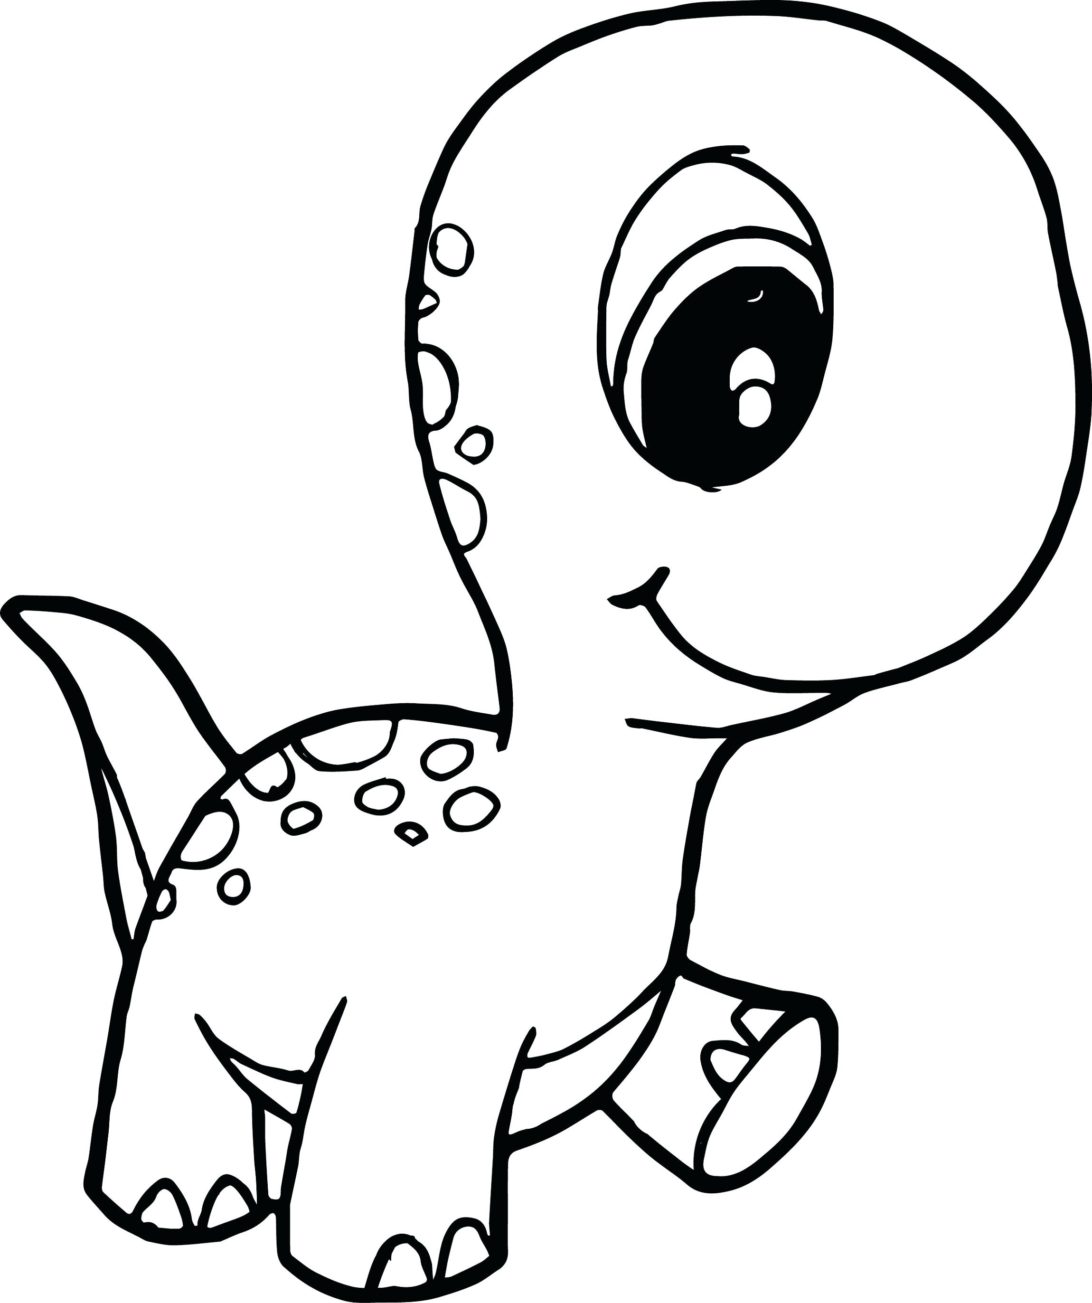 33 Most Magic Baby Dinosaur Coloring Pages Cute Raptor Types ...